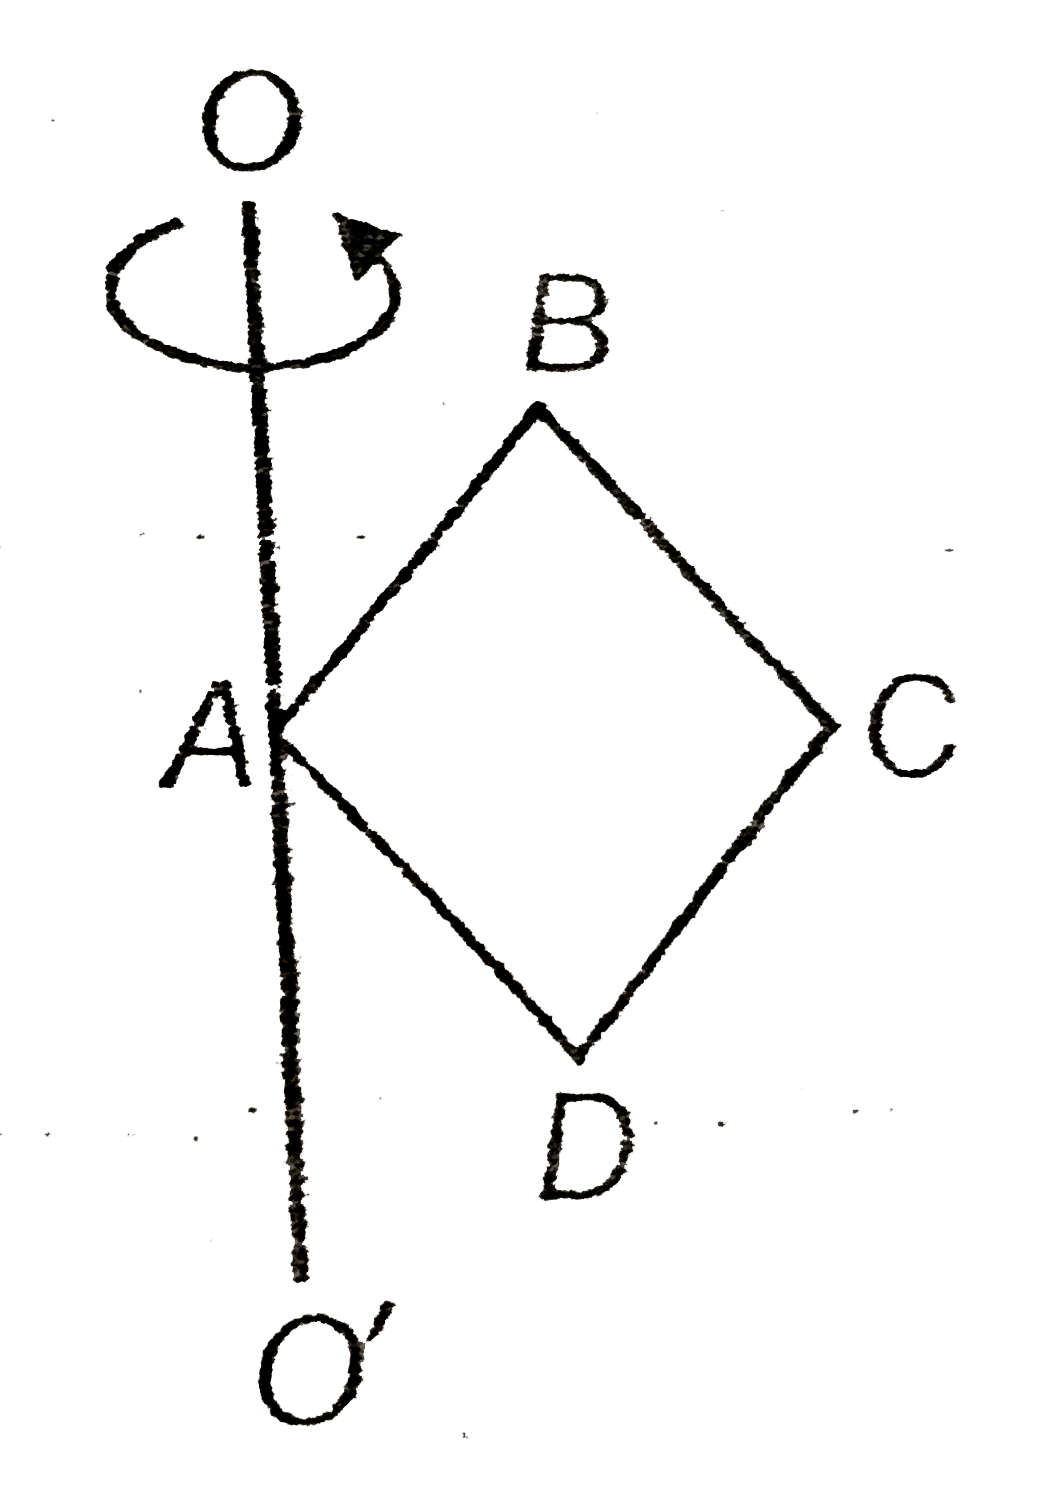 Four rods of equal mass m and length L. Forms a square ABCD as shown in figure. The moment of inertia of ABCD about the axis OO' passing through the point A is